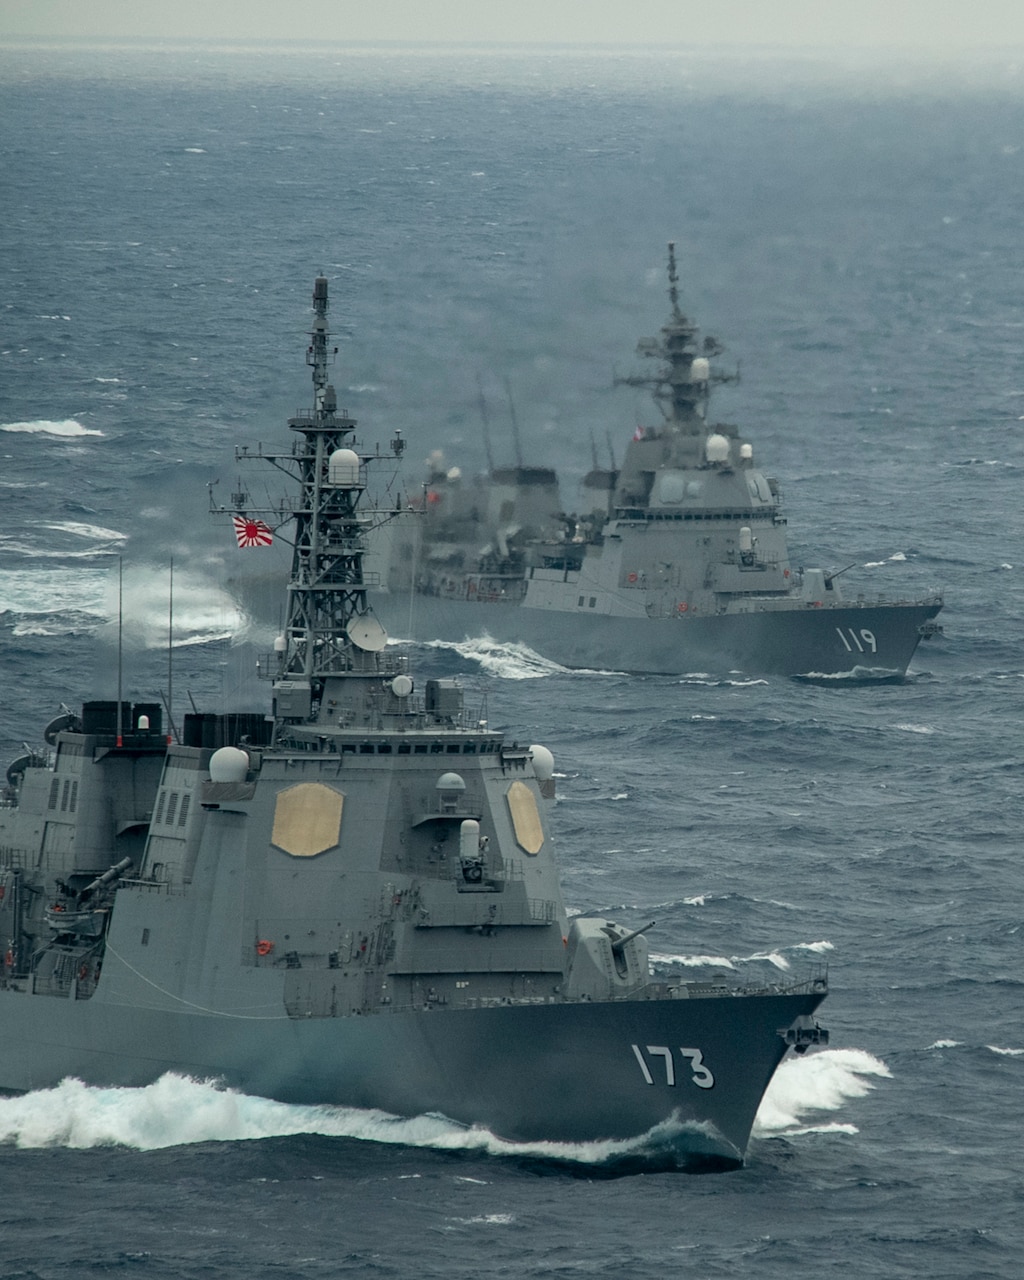 PACIFIC OCEAN (Jan. 15, 2021) – The Japan Maritime Self-Defense Force Kongo-class guided-missile destroyer JS Kongo (DDG 173), front, and Asahi-class destroyer JS Asahi (DD 119) transit the Pacific Ocean Jan. 15, 2021 with the Theodore Roosevelt Carrier Strike Group. The Theodore Roosevelt Carrier Strike Group is on a scheduled deployment to the U.S. 7th Fleet area of operations. As the U.S. Navy's largest forward deployed fleet, with its approximate 50-70 ships and submarines, 140 aircraft, and 20,000 Sailors in the area of operations at any given time, 7th Fleet conducts forward-deployed naval operations in support of U.S. national interests throughout a free and open Indo-Pacific area of operations to foster maritime security, promote stability, and prevent conflict alongside 35 other maritime nations and partners. (U.S. Navy photo by Mass Communication Specialist 2nd Class Casey Scoular)